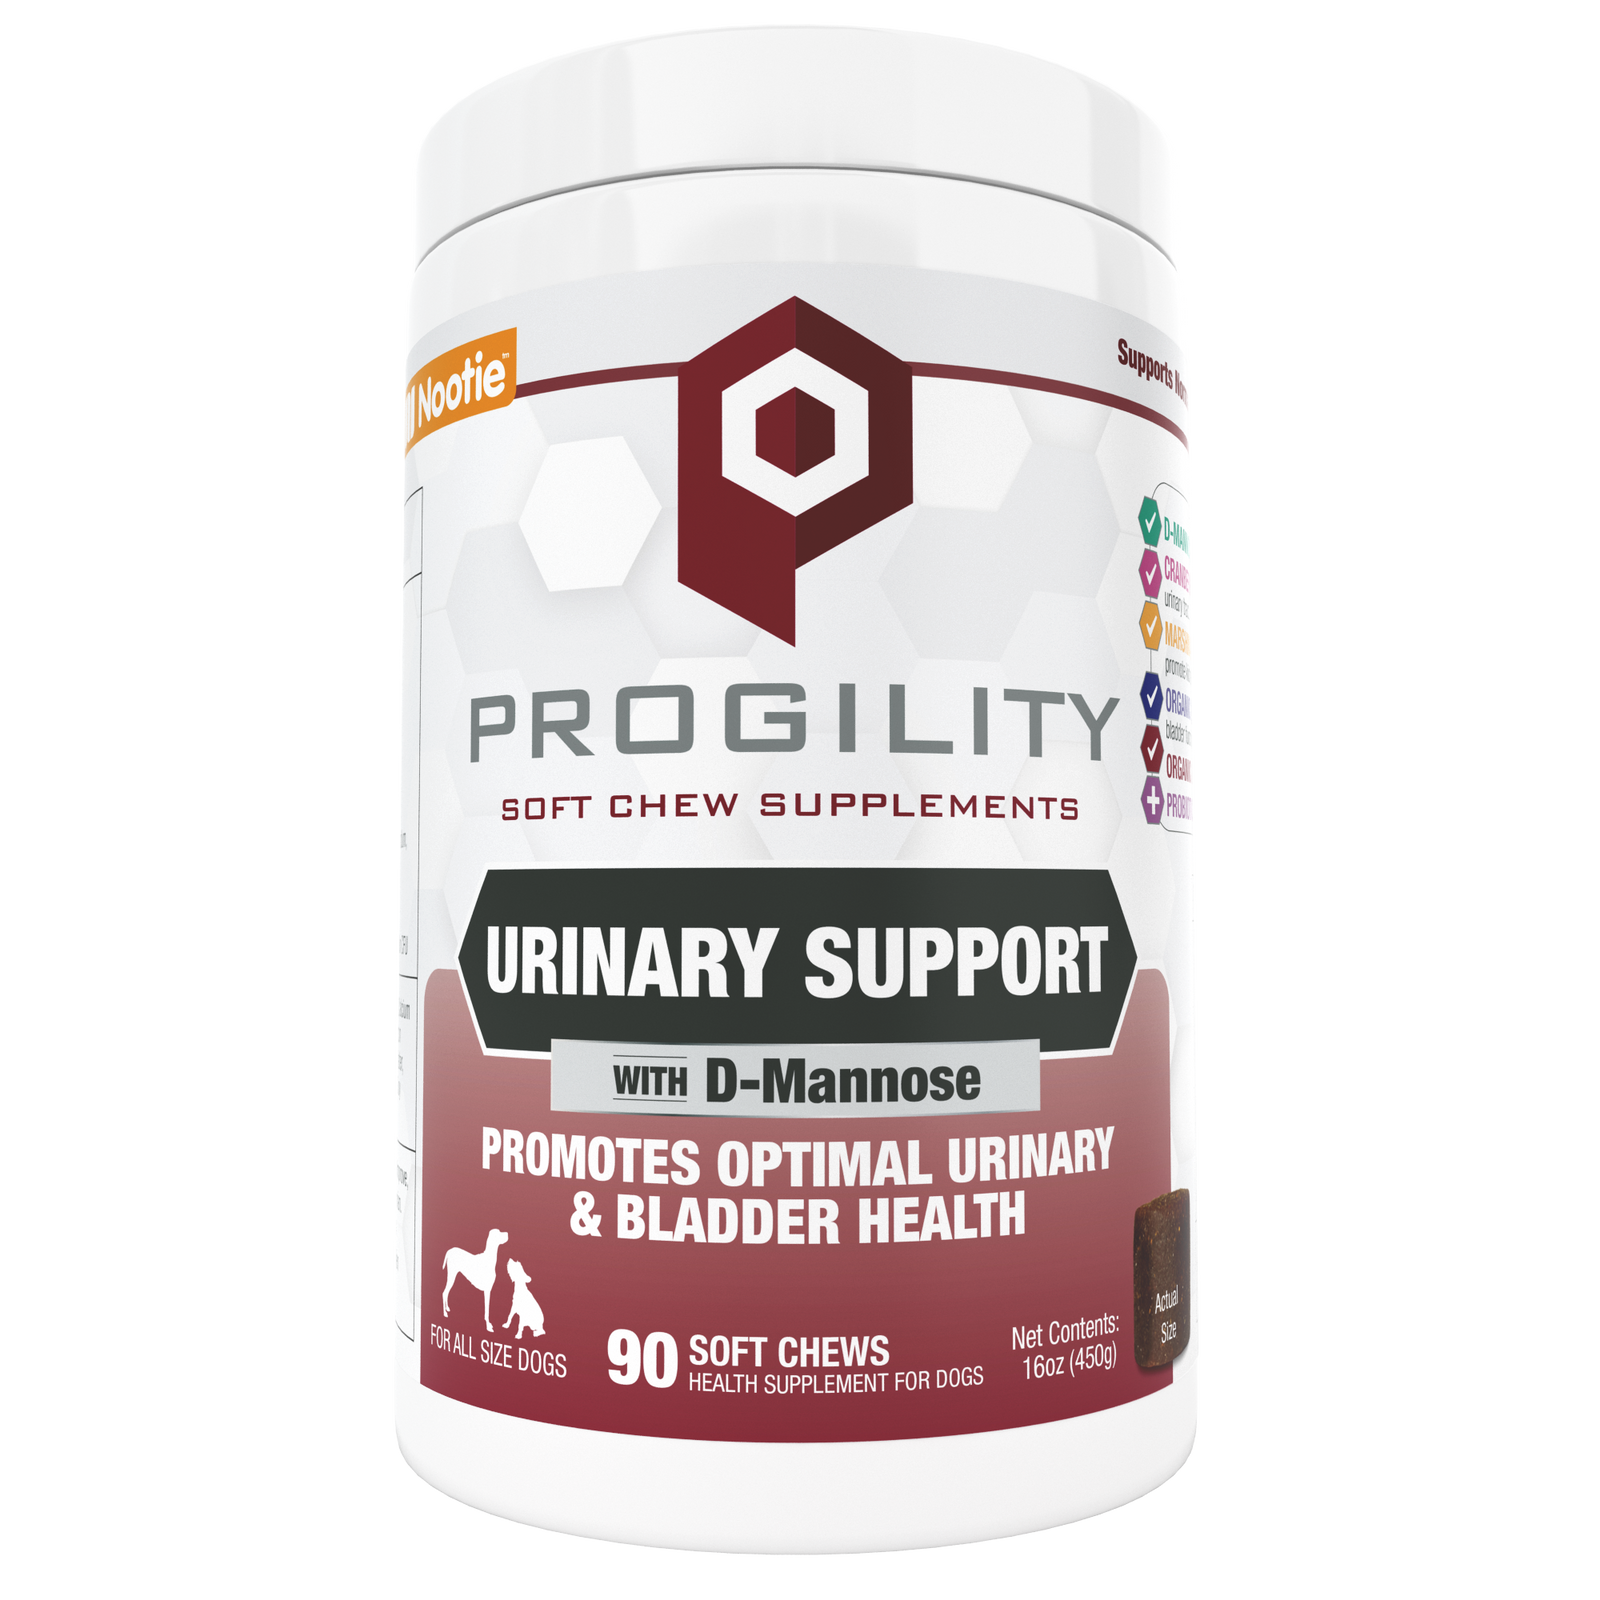 Progility Urinary Support Soft Chew Health Supplement For Dogs | Support Normal Function for Bladder, Urinary, and Kidney Health